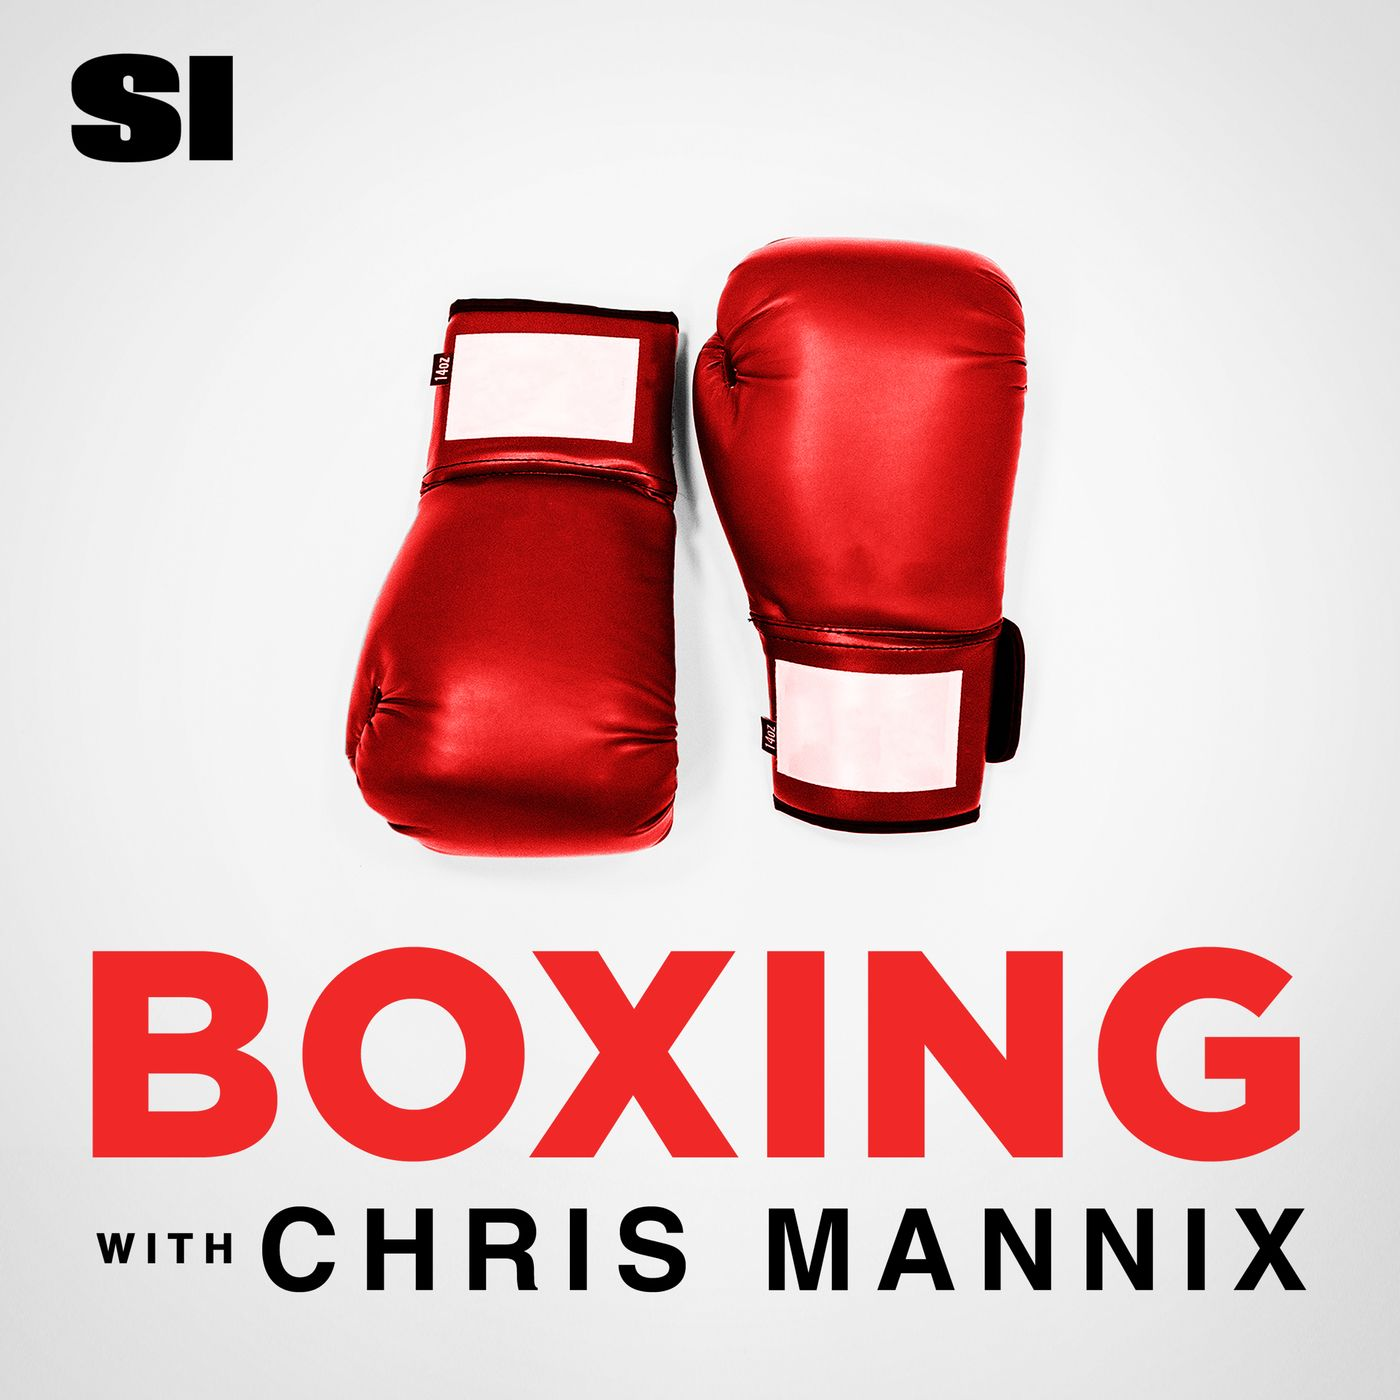 A highlight from Boxing with Chris Mannix - The Trouble with Tank